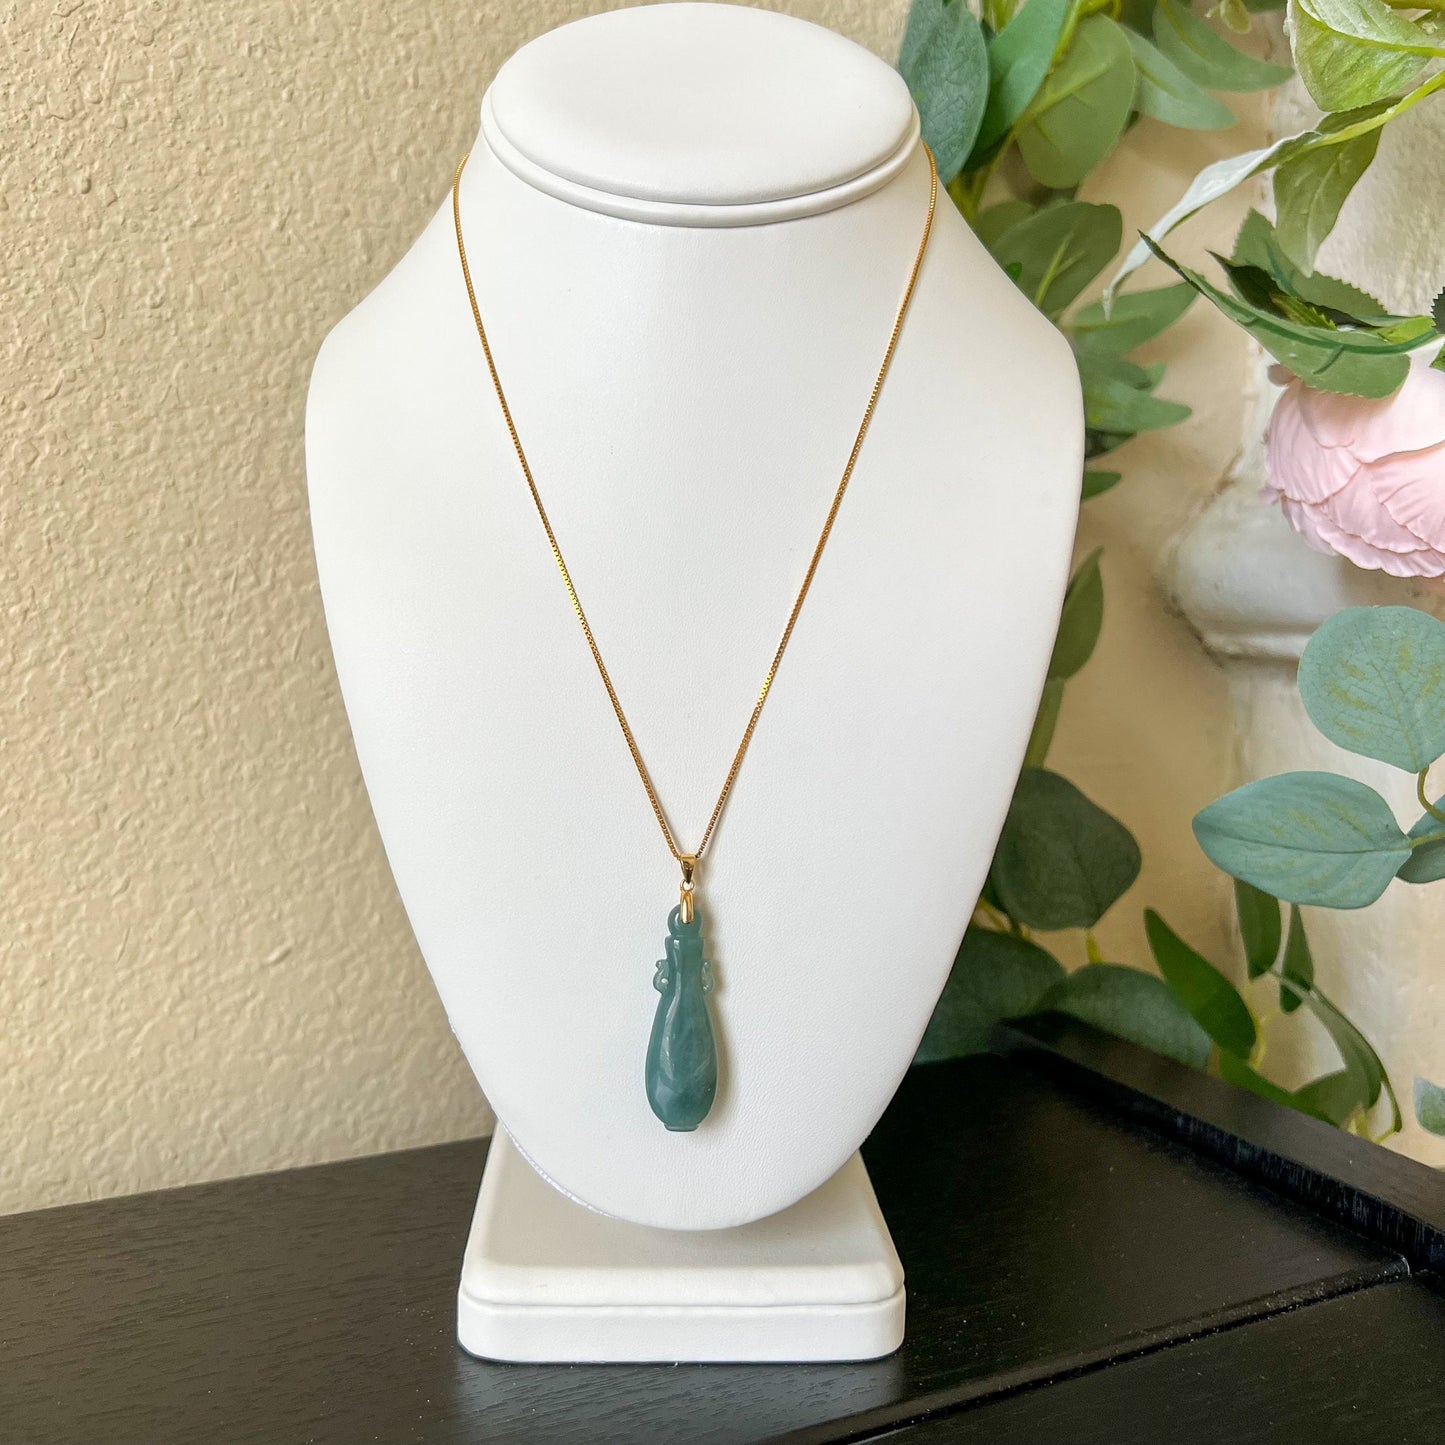 Icy Green Blue Translucent Jadeite Jade Vase Pendant Jade Necklace, Gold Plated Sterling Silver, XY-0622-1668323129 - AriaDesignCollection